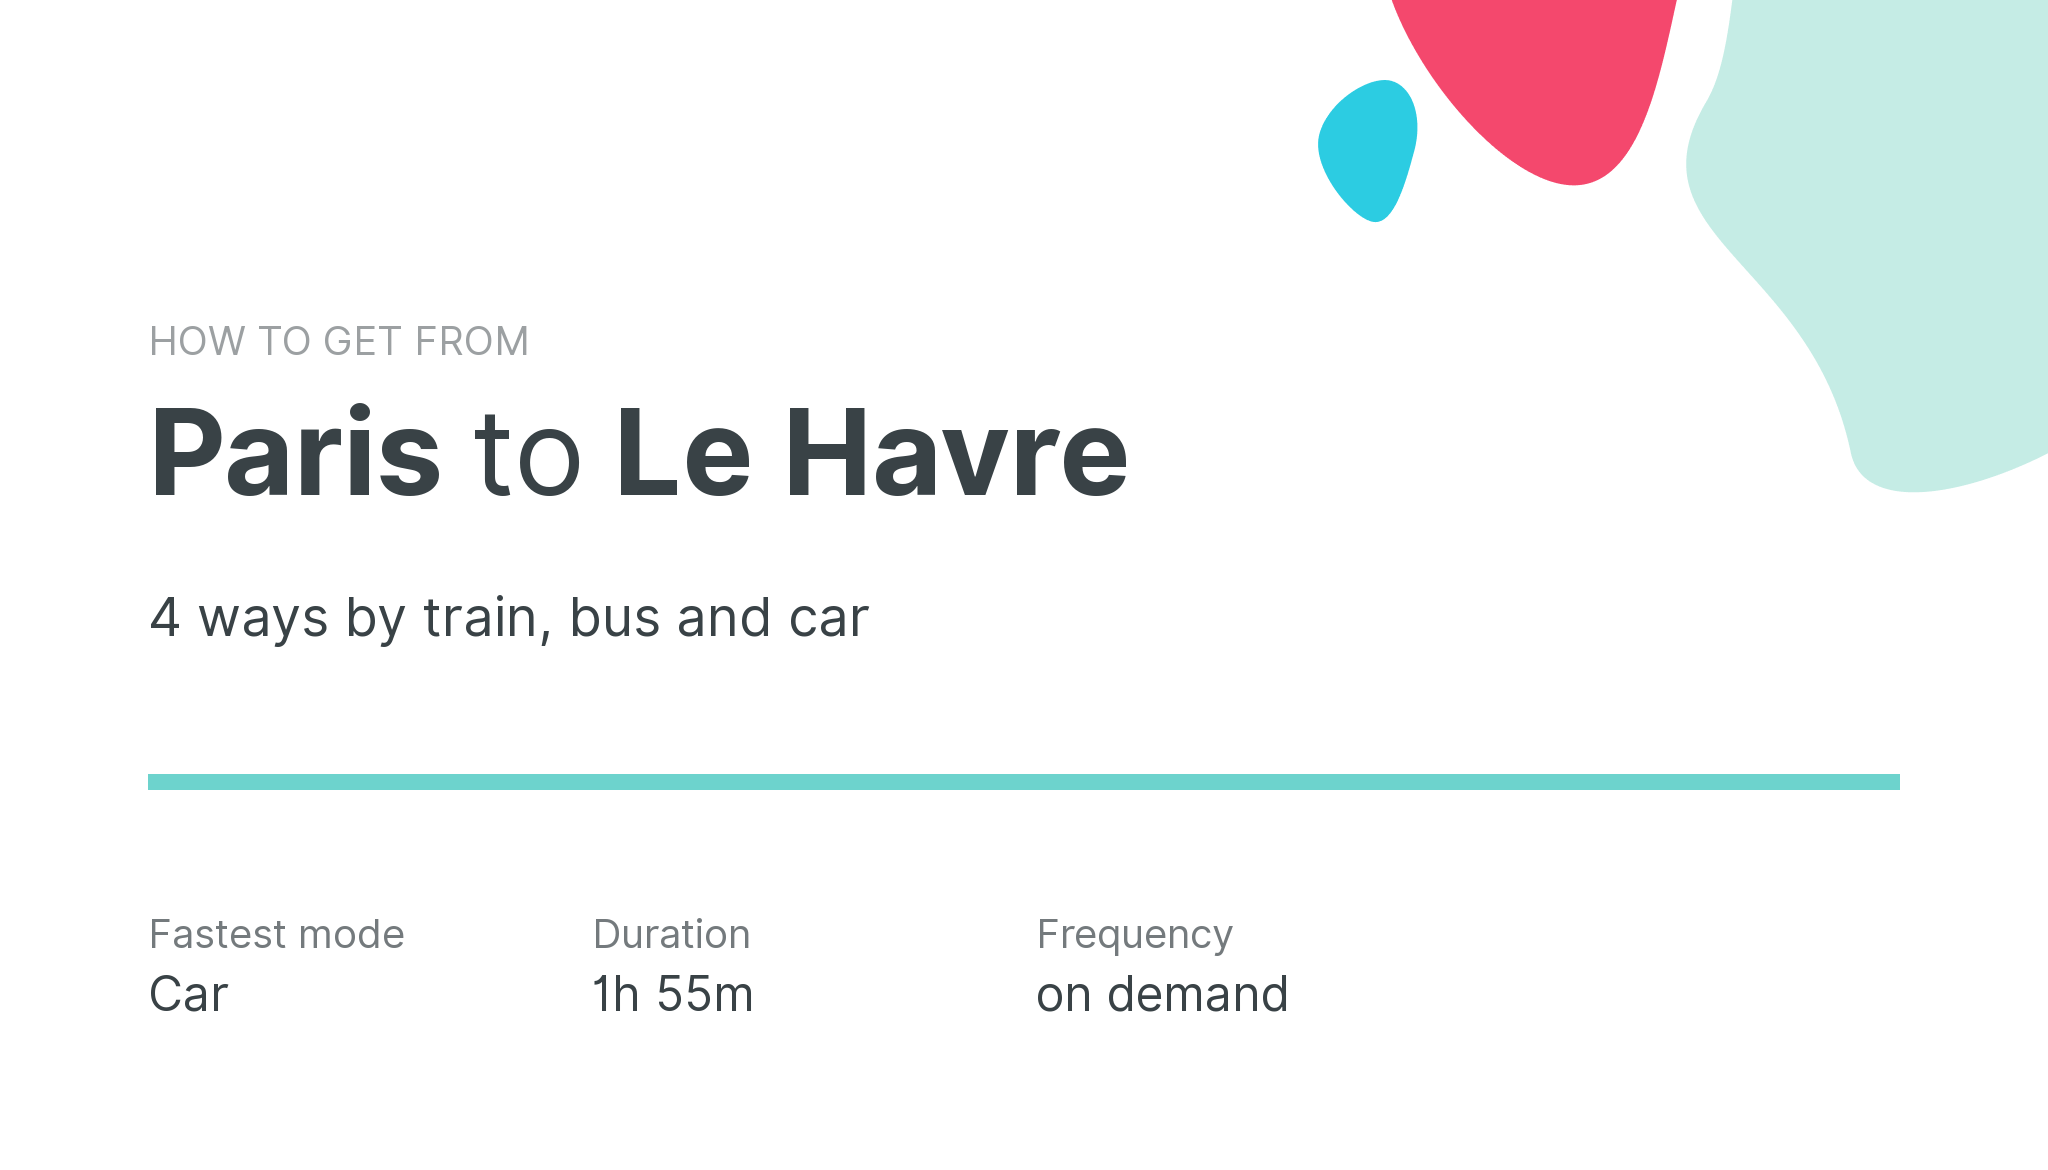 How do I get from Paris to Le Havre